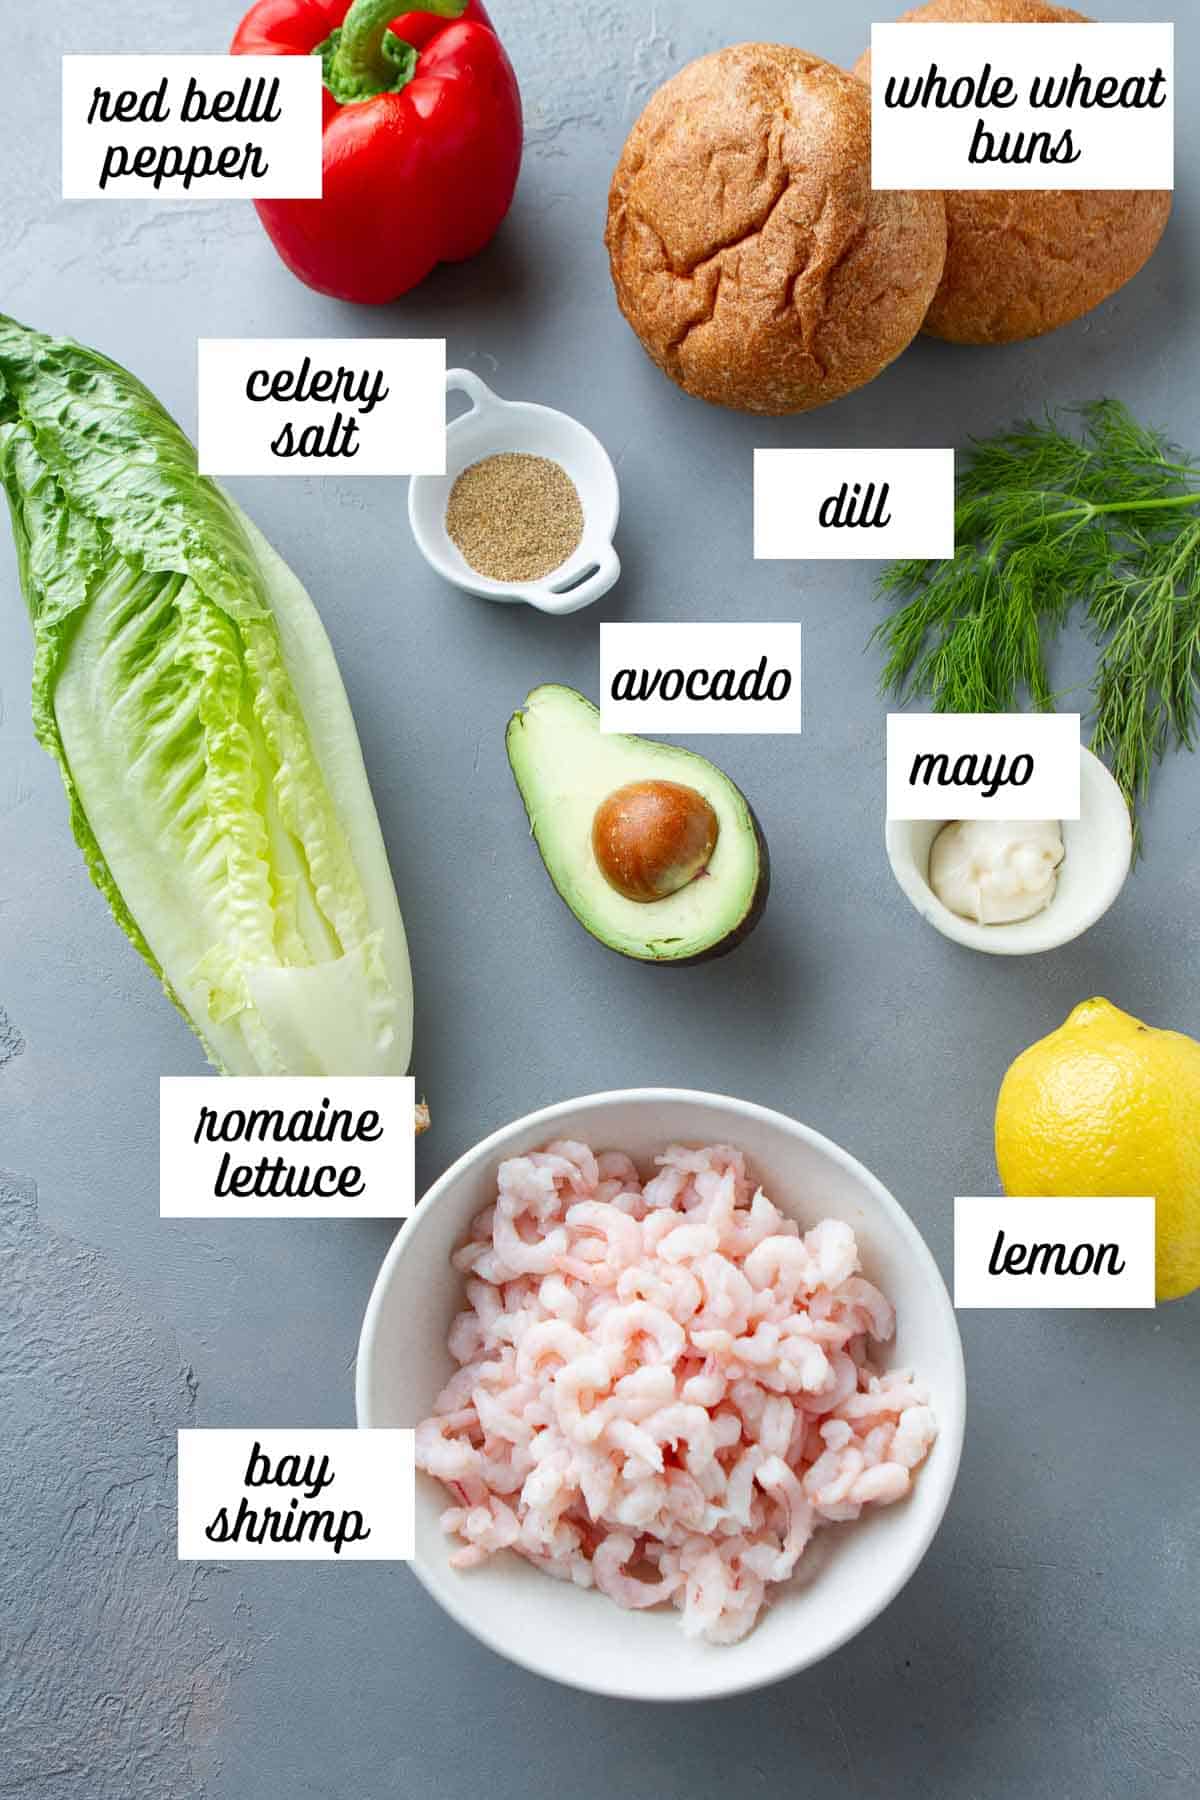 Labeled ingredients for shrimp avocado sandwich on a gray background.